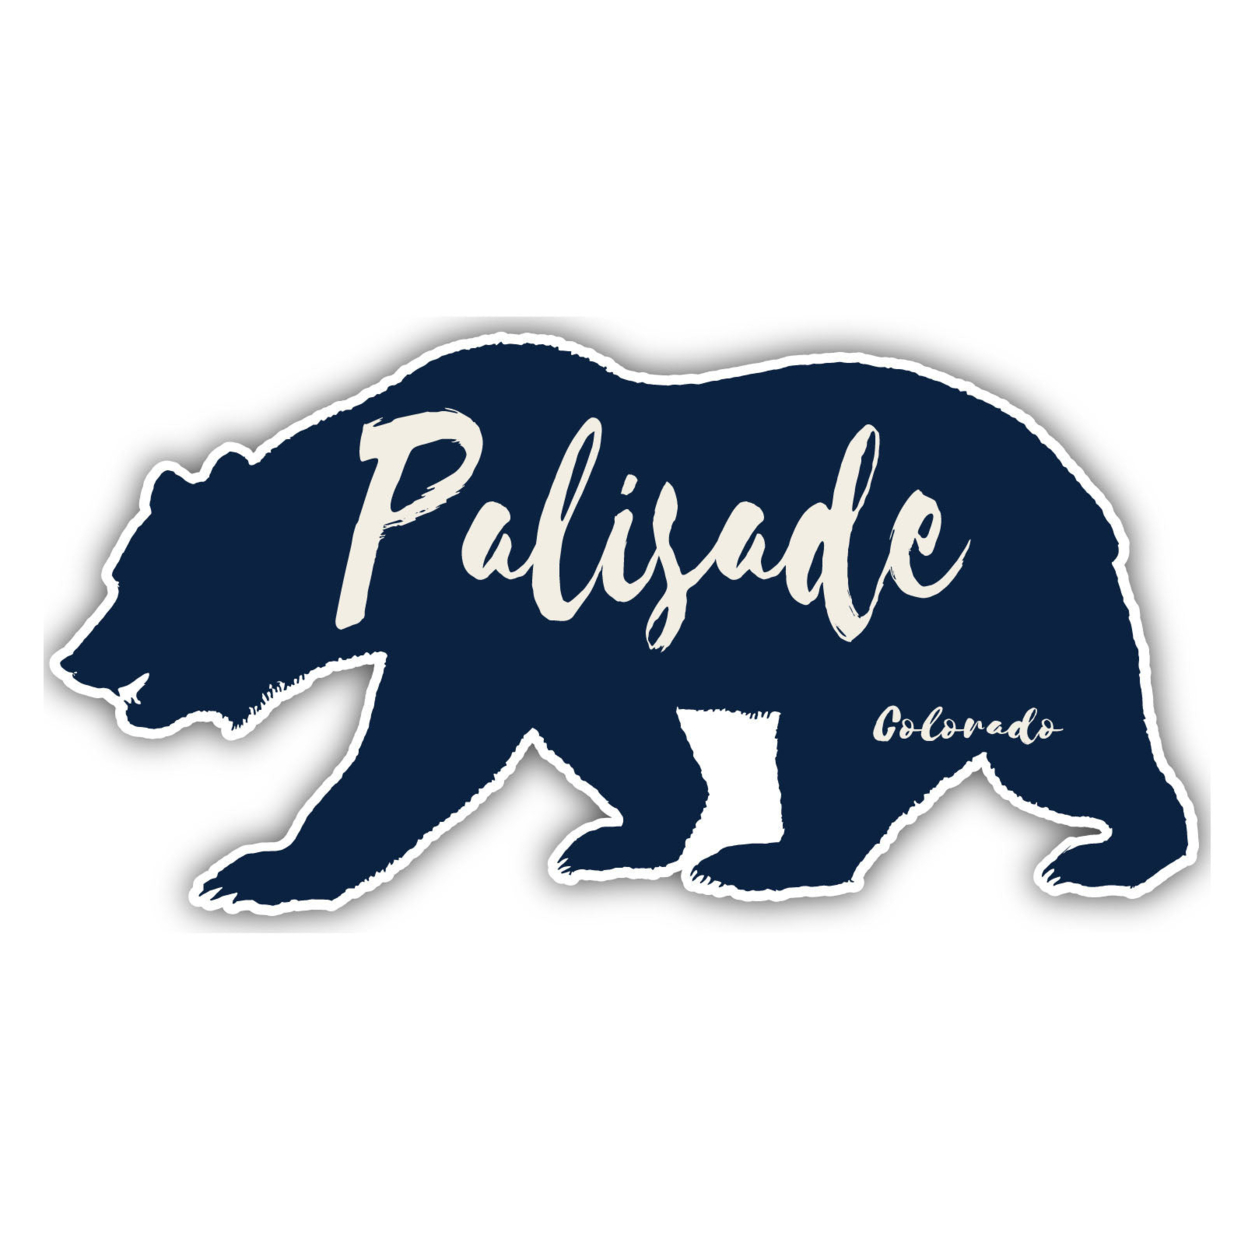 Palisade Colorado Souvenir Decorative Stickers (Choose Theme And Size) - Single Unit, 4-Inch, Great Outdoors